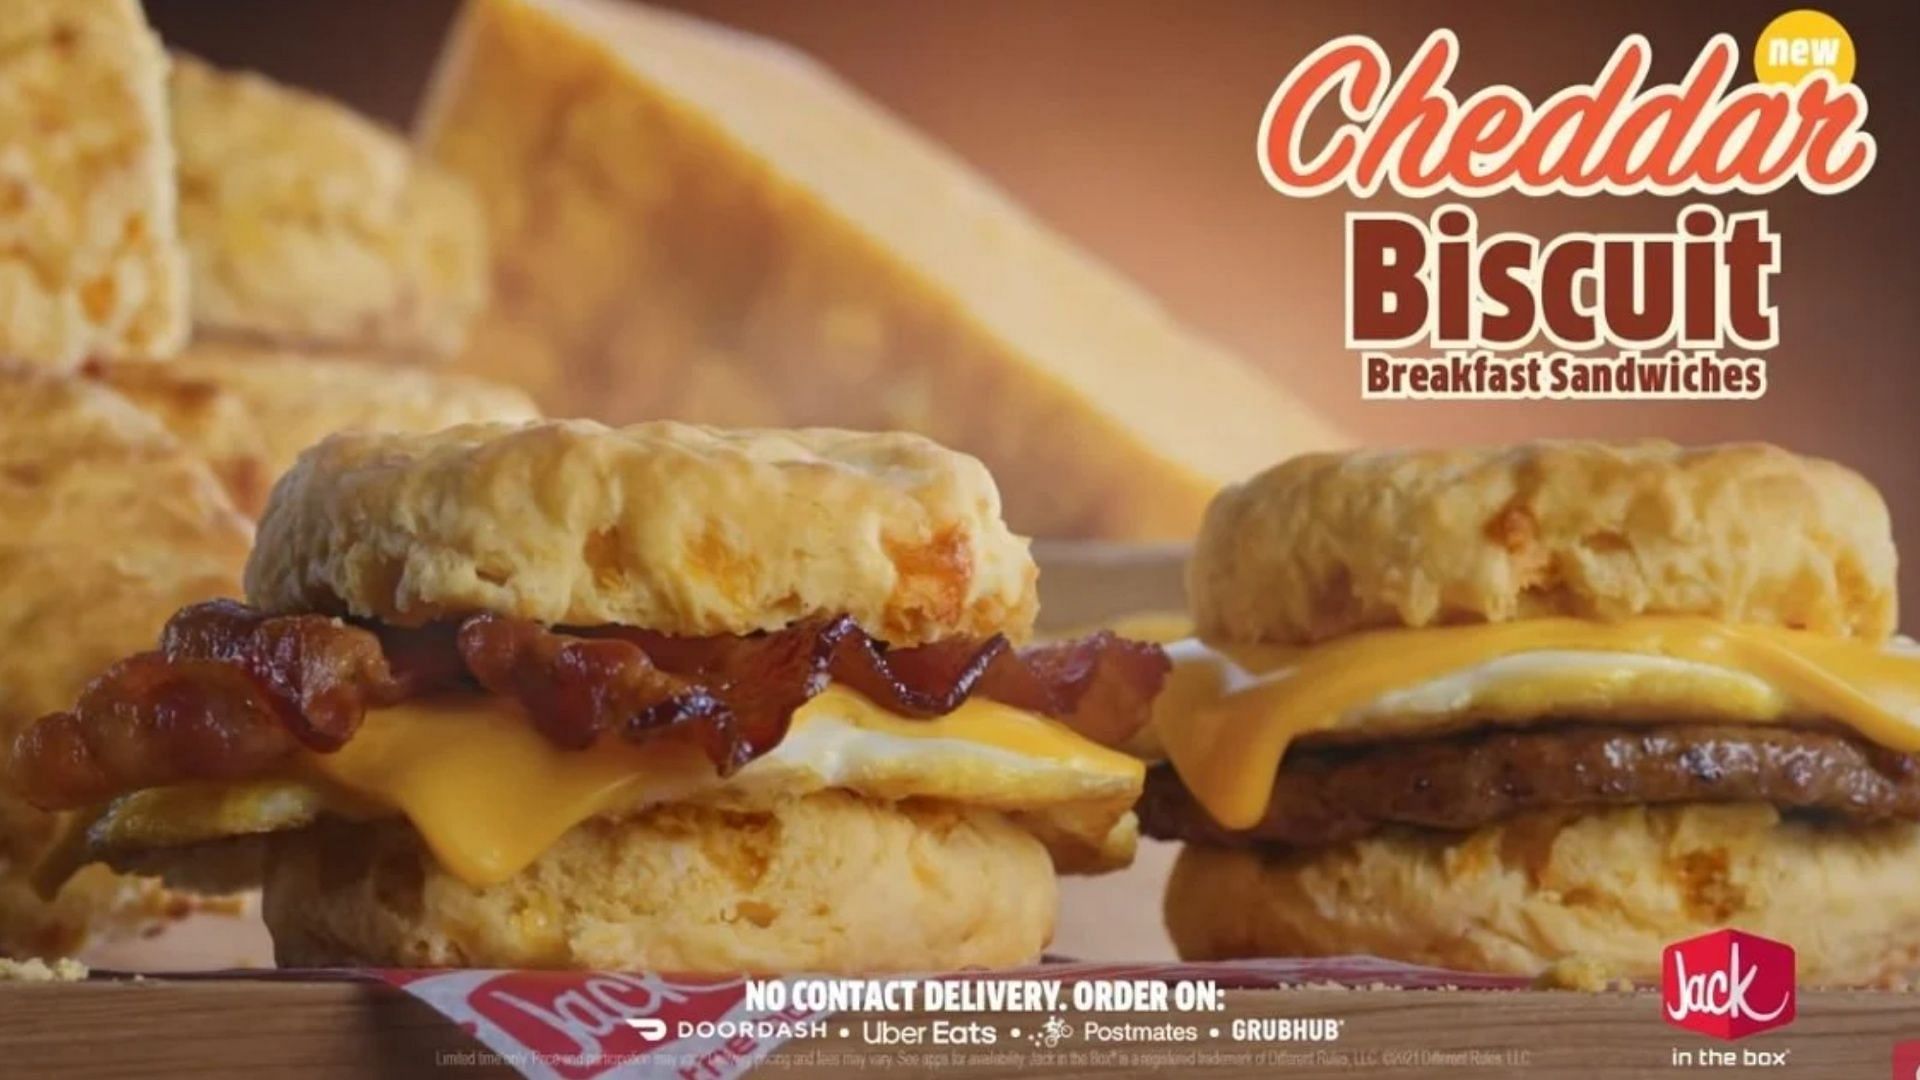 The Cheddar Biscuit Breakfast Sandwiches are available on the menu starting June 14 (Image via Jack in the Box)